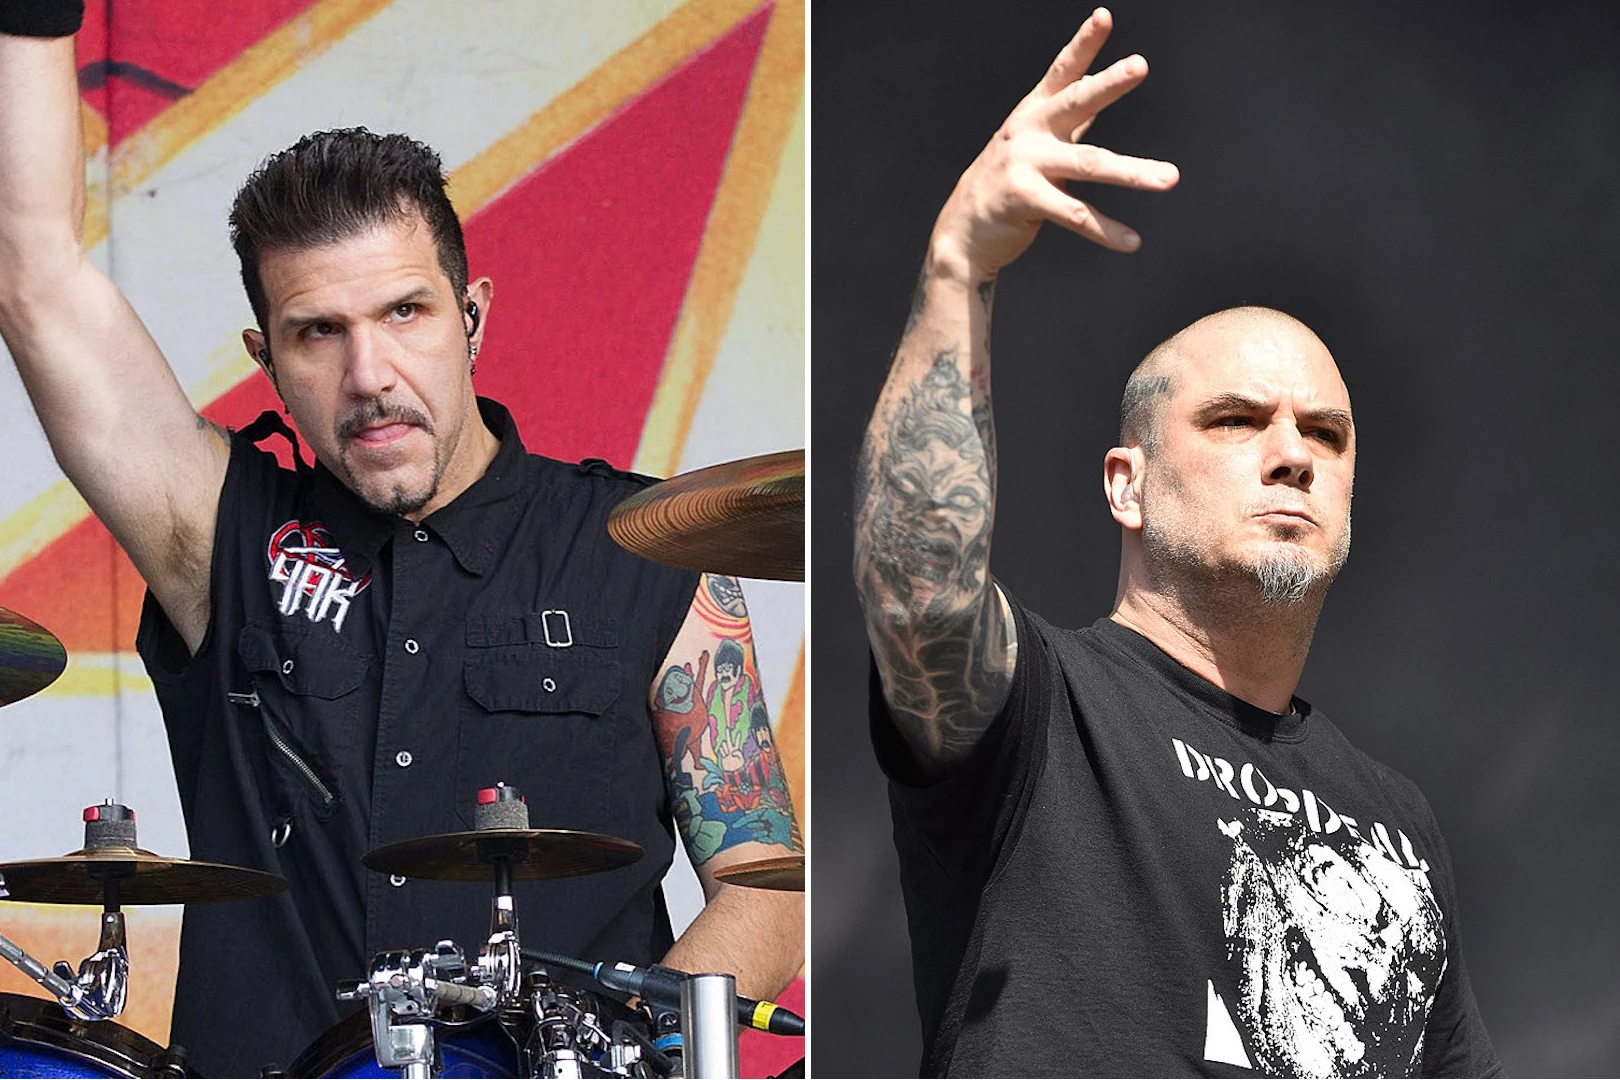 Charlie Benante on Pantera's Return - 'This Was Never a Reunion'